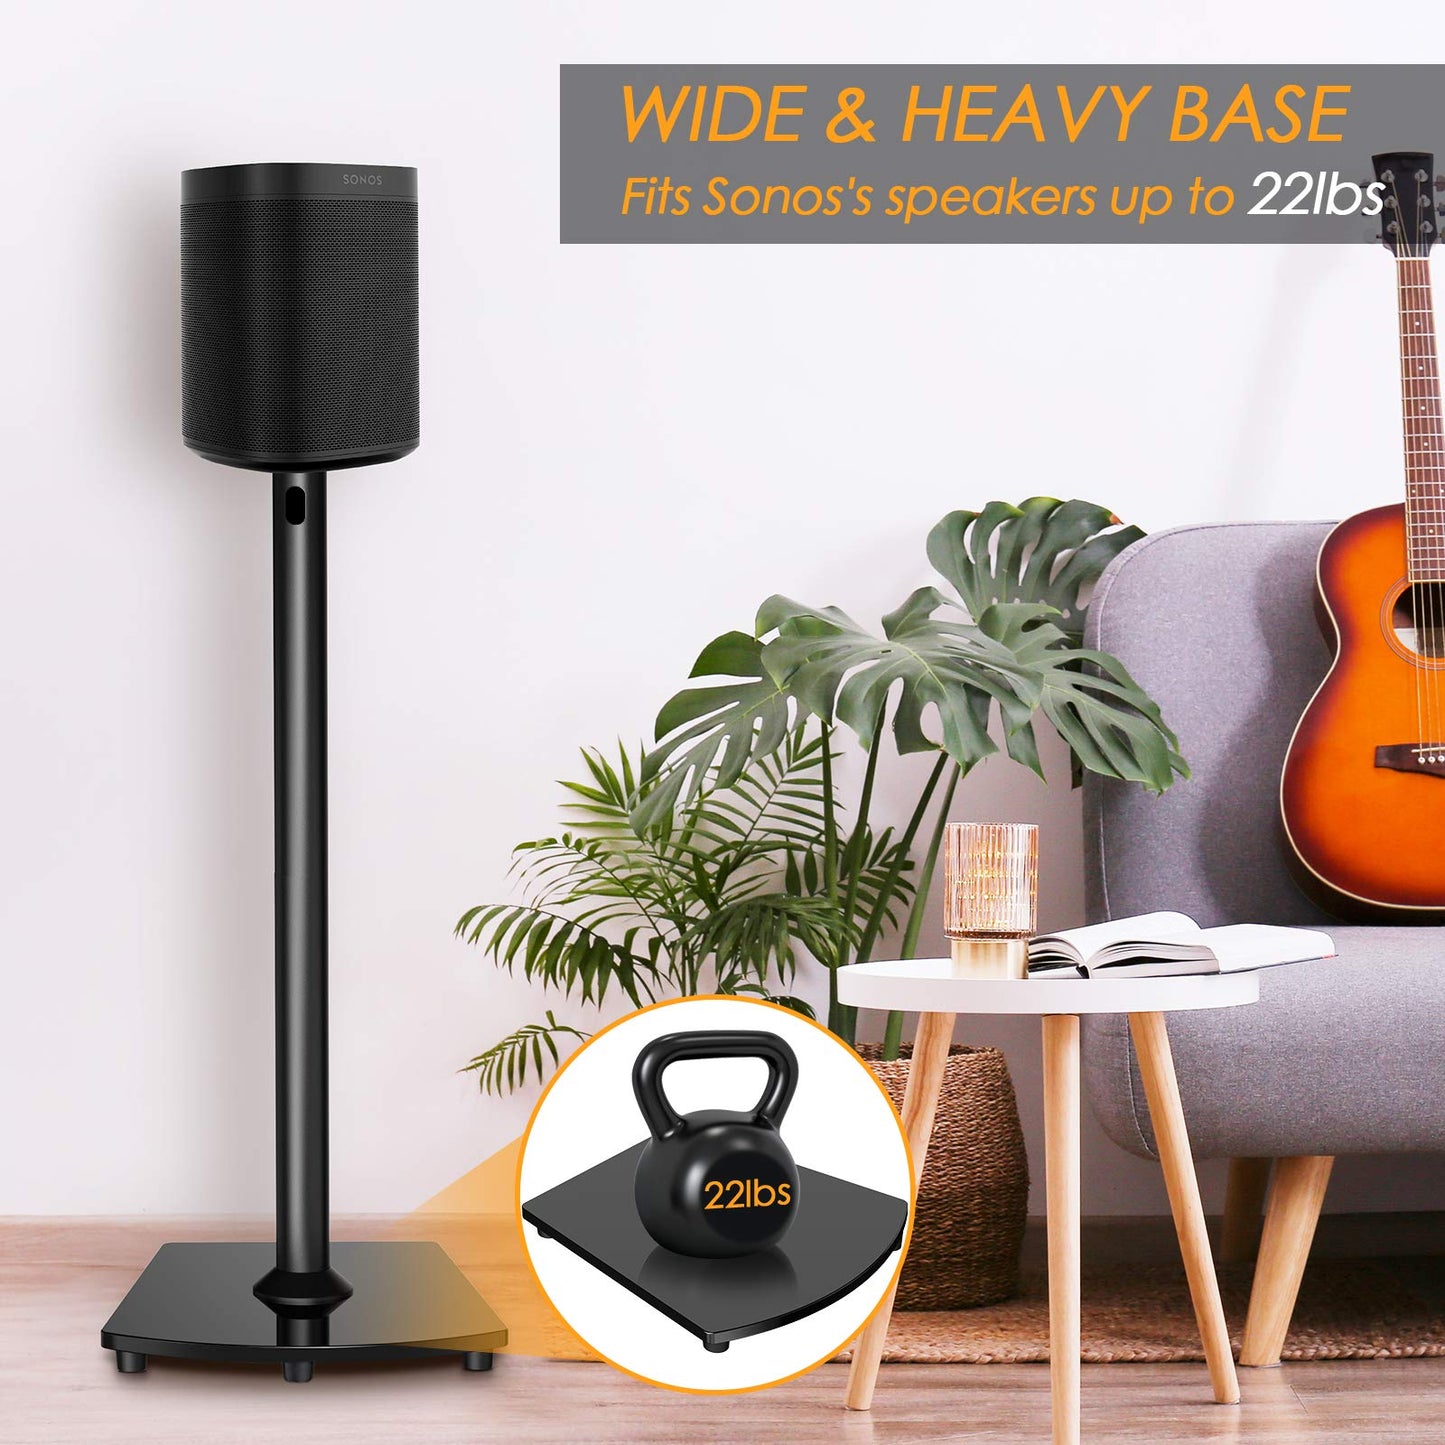 Wireless Speaker Stands Designed for Sonos Speakers Pair of Sonos Stands for Sonos One, One SL, Play:1 Play:3 Play:5 Heavy Duty Floor Speaker Mount with Cable Management Black